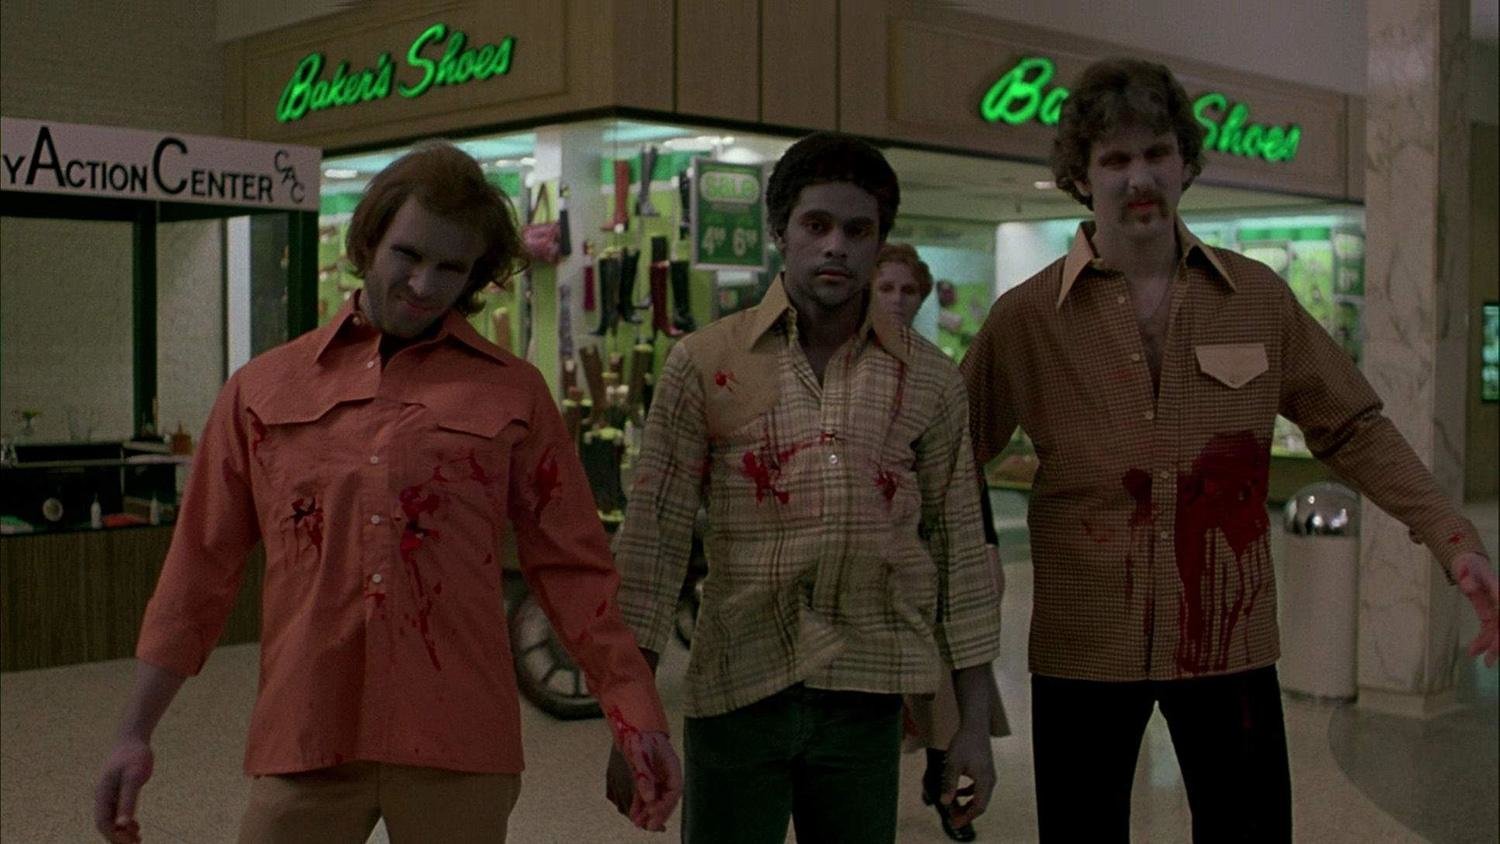 Zombie - Dawn of the Dead - Argento Cut